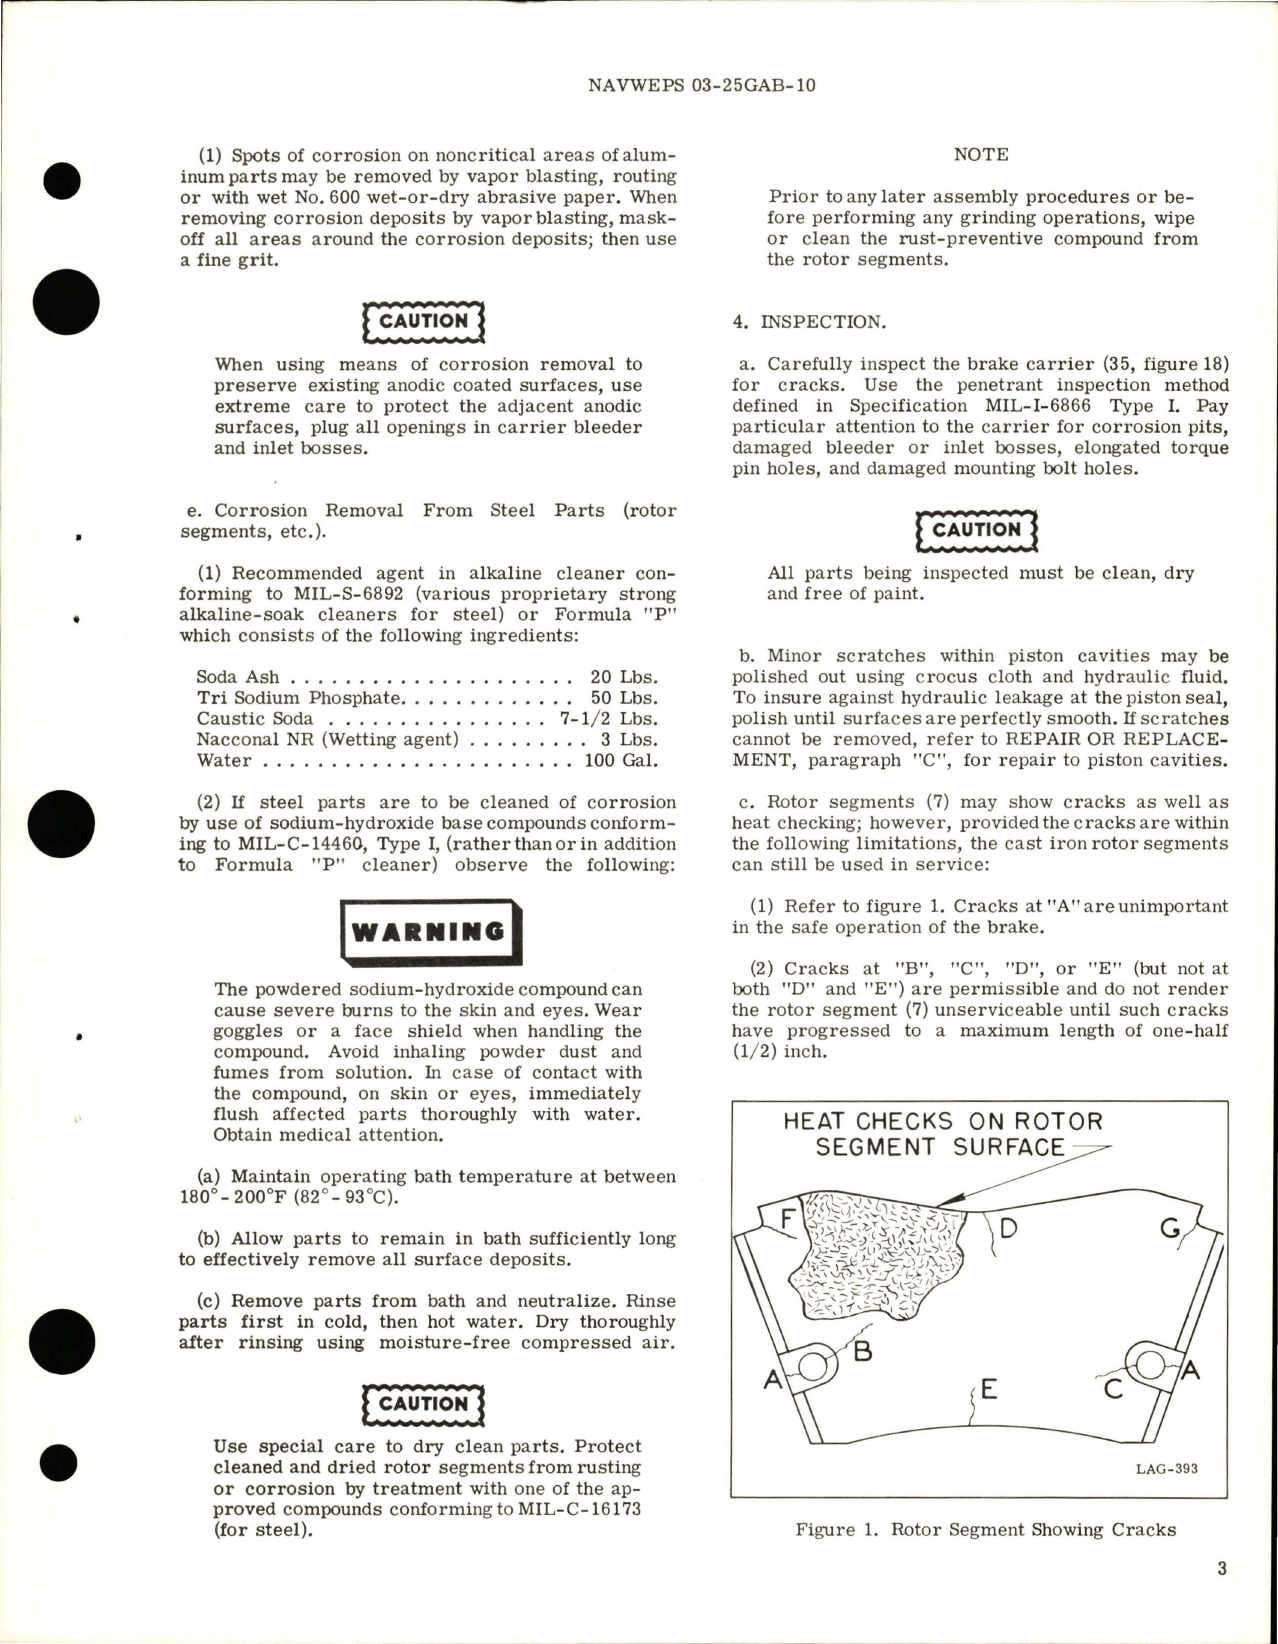 Sample page 5 from AirCorps Library document: Overhaul Instructions with Illustrated Parts for 13 1/2 x 9 1/2 -2 Rotor Brake Assembly - Part 147515FA-C-2